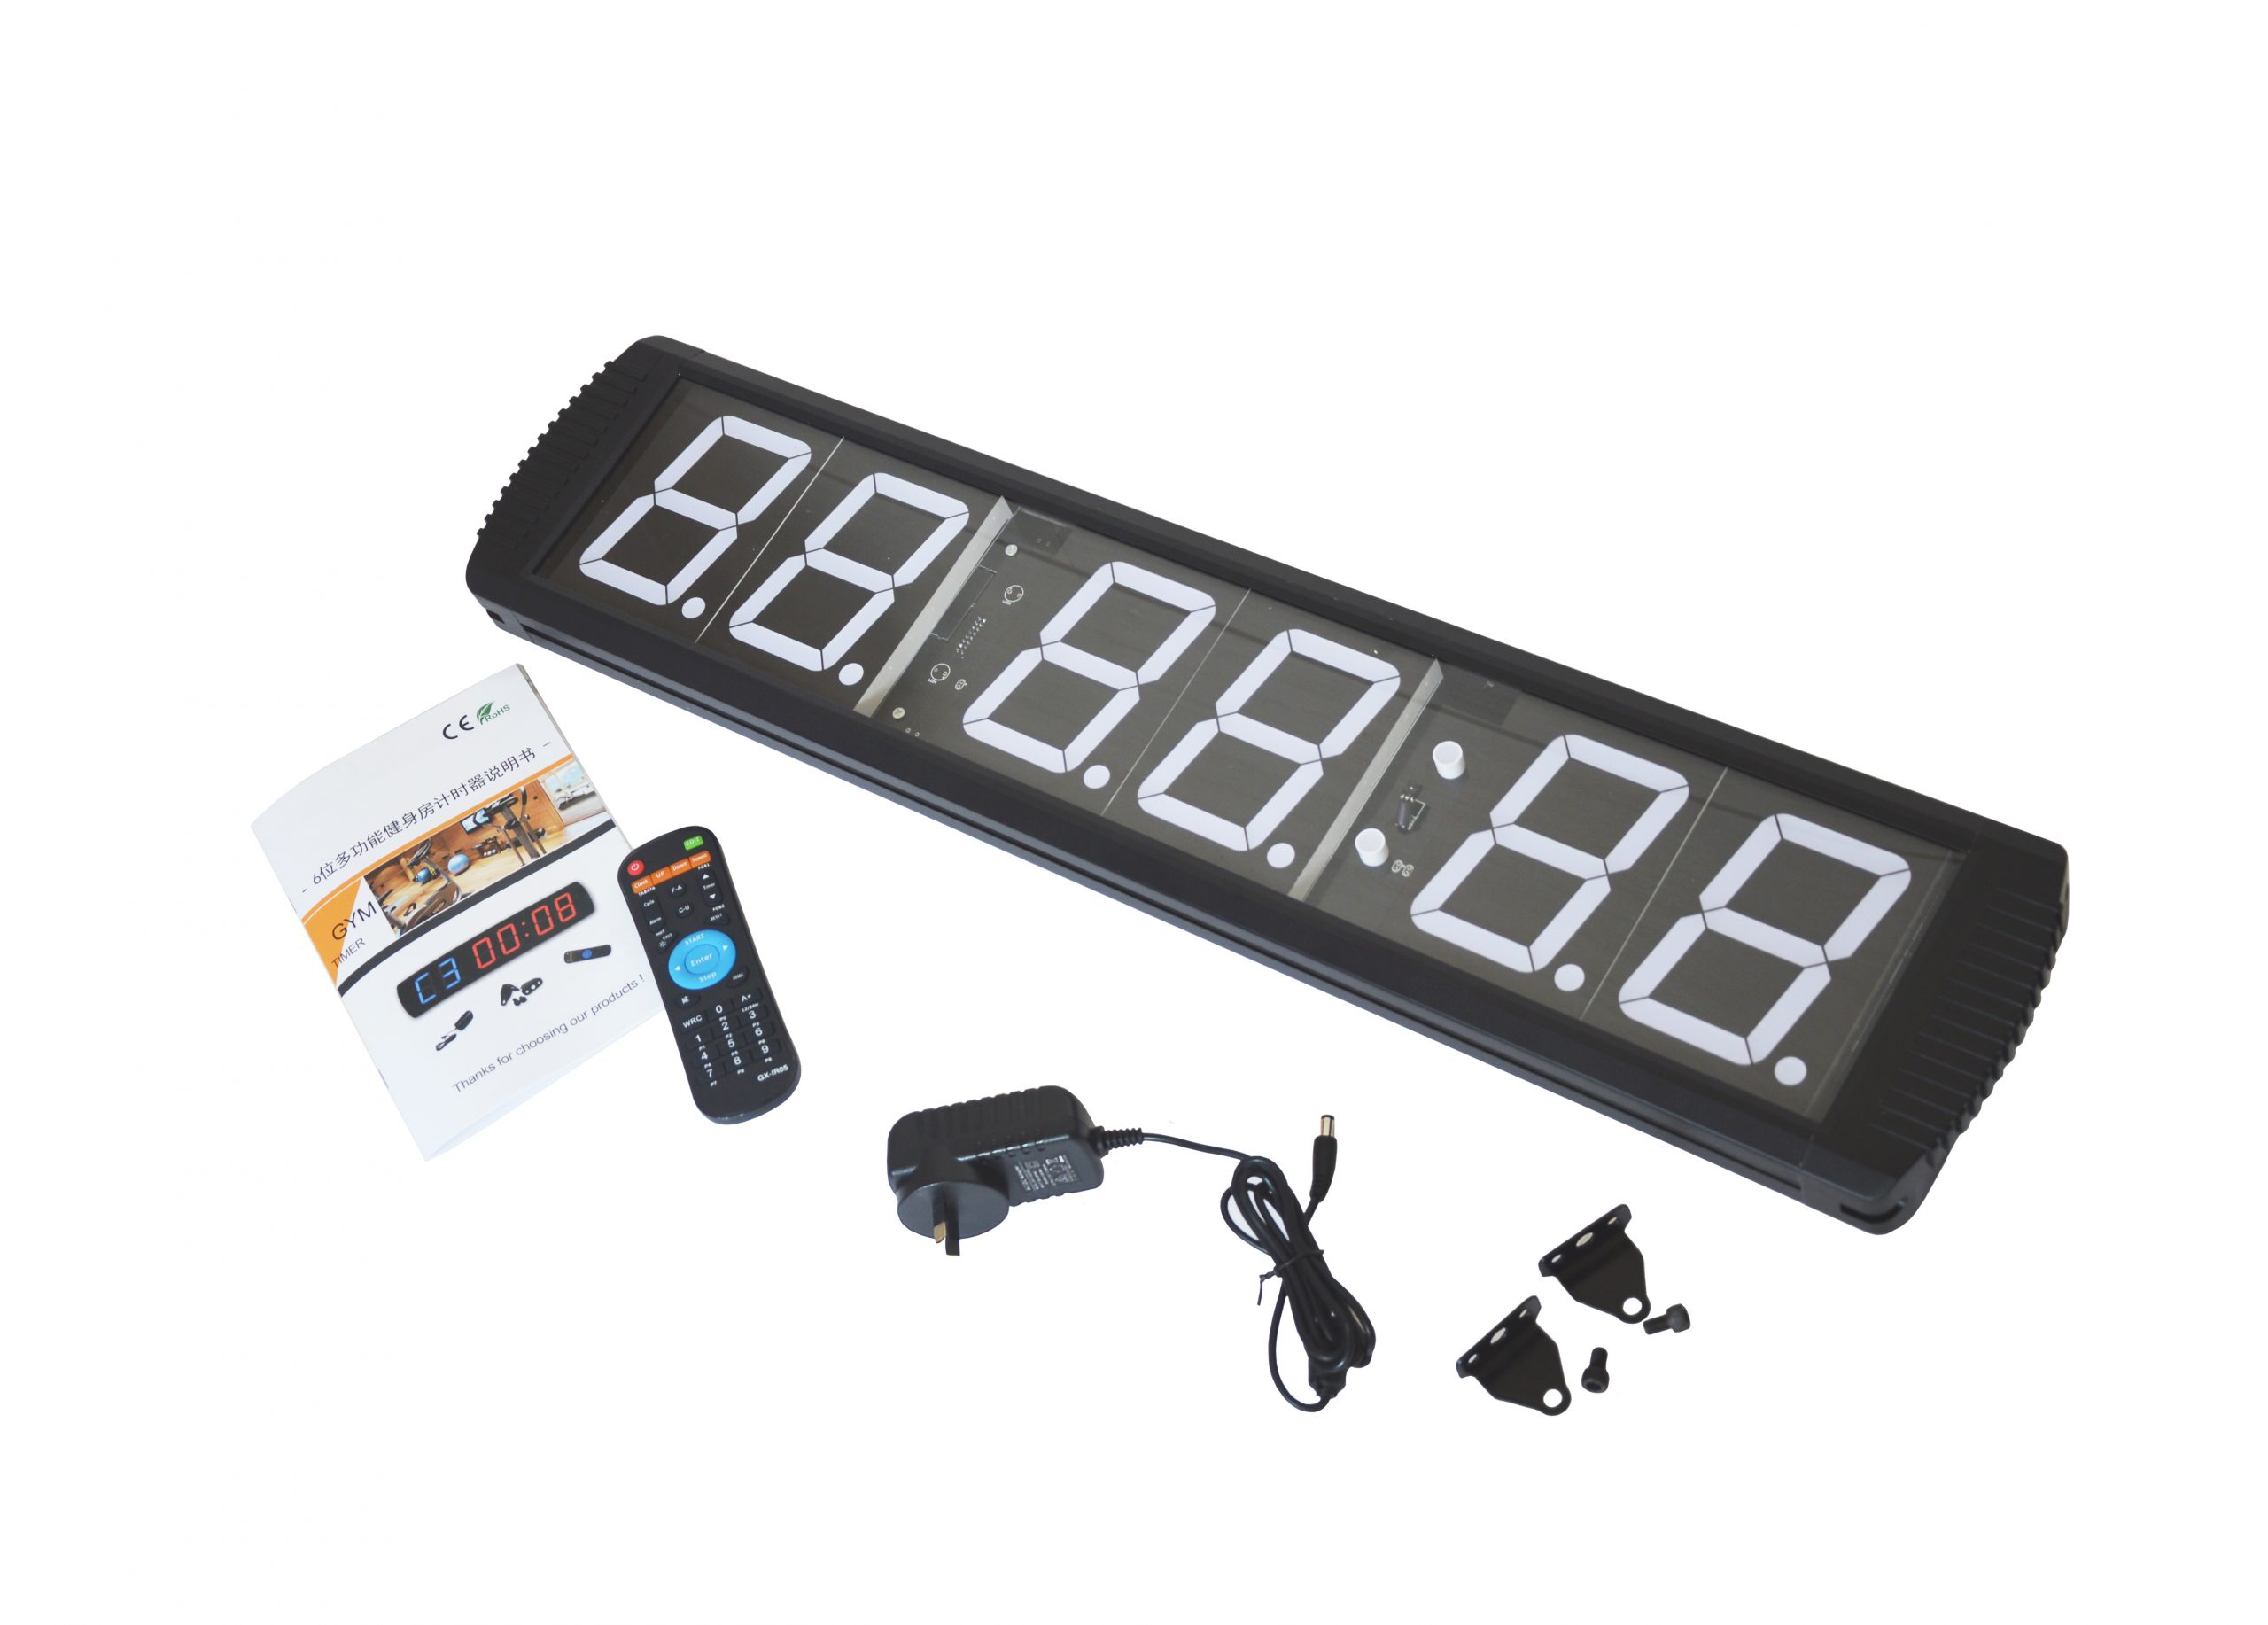 workout clock with seconds